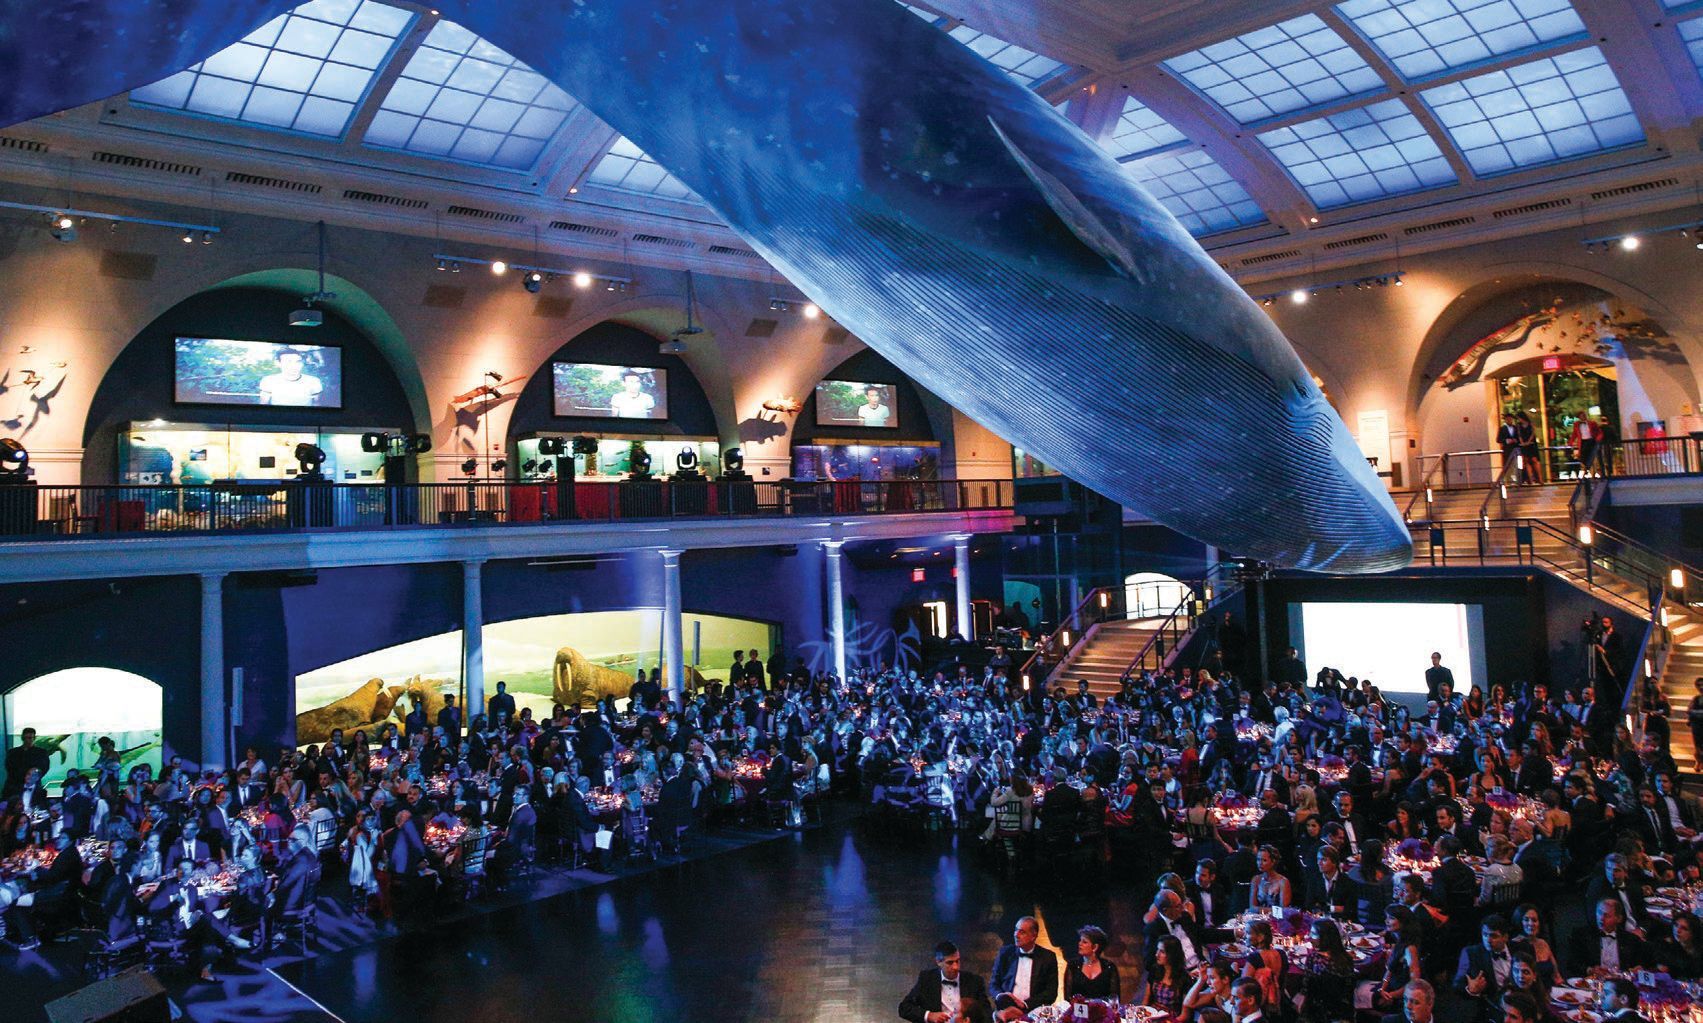 The American Museum of Natural History’s gala is always an elegant event. PHOTO BY DAVID X PRUTTING/BFA